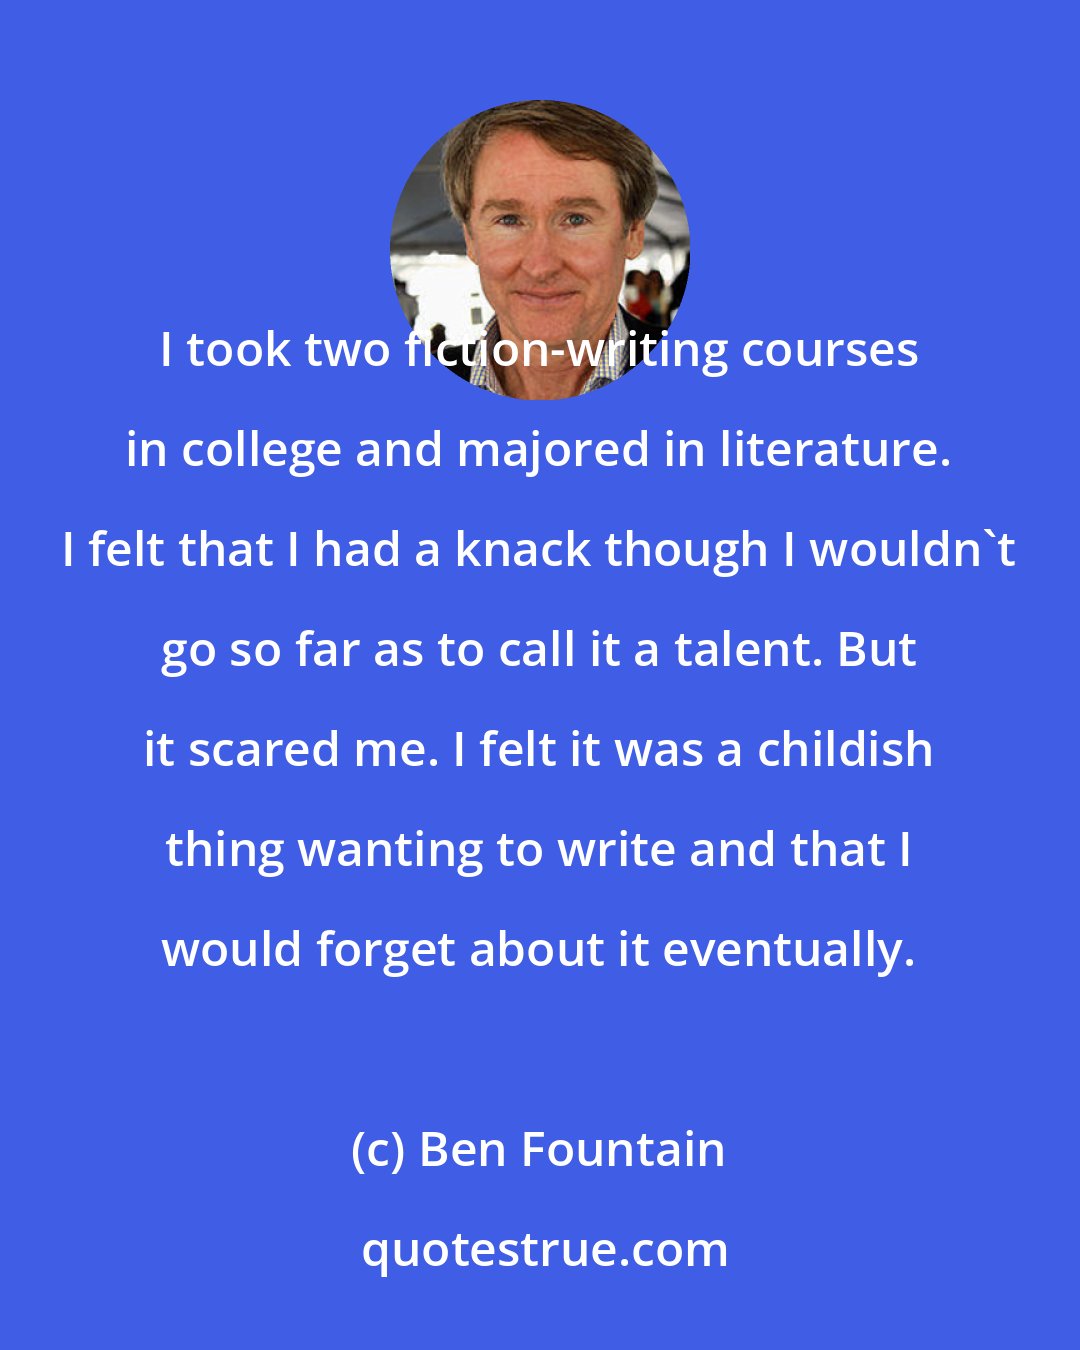 Ben Fountain: I took two fiction-writing courses in college and majored in literature. I felt that I had a knack though I wouldn't go so far as to call it a talent. But it scared me. I felt it was a childish thing wanting to write and that I would forget about it eventually.